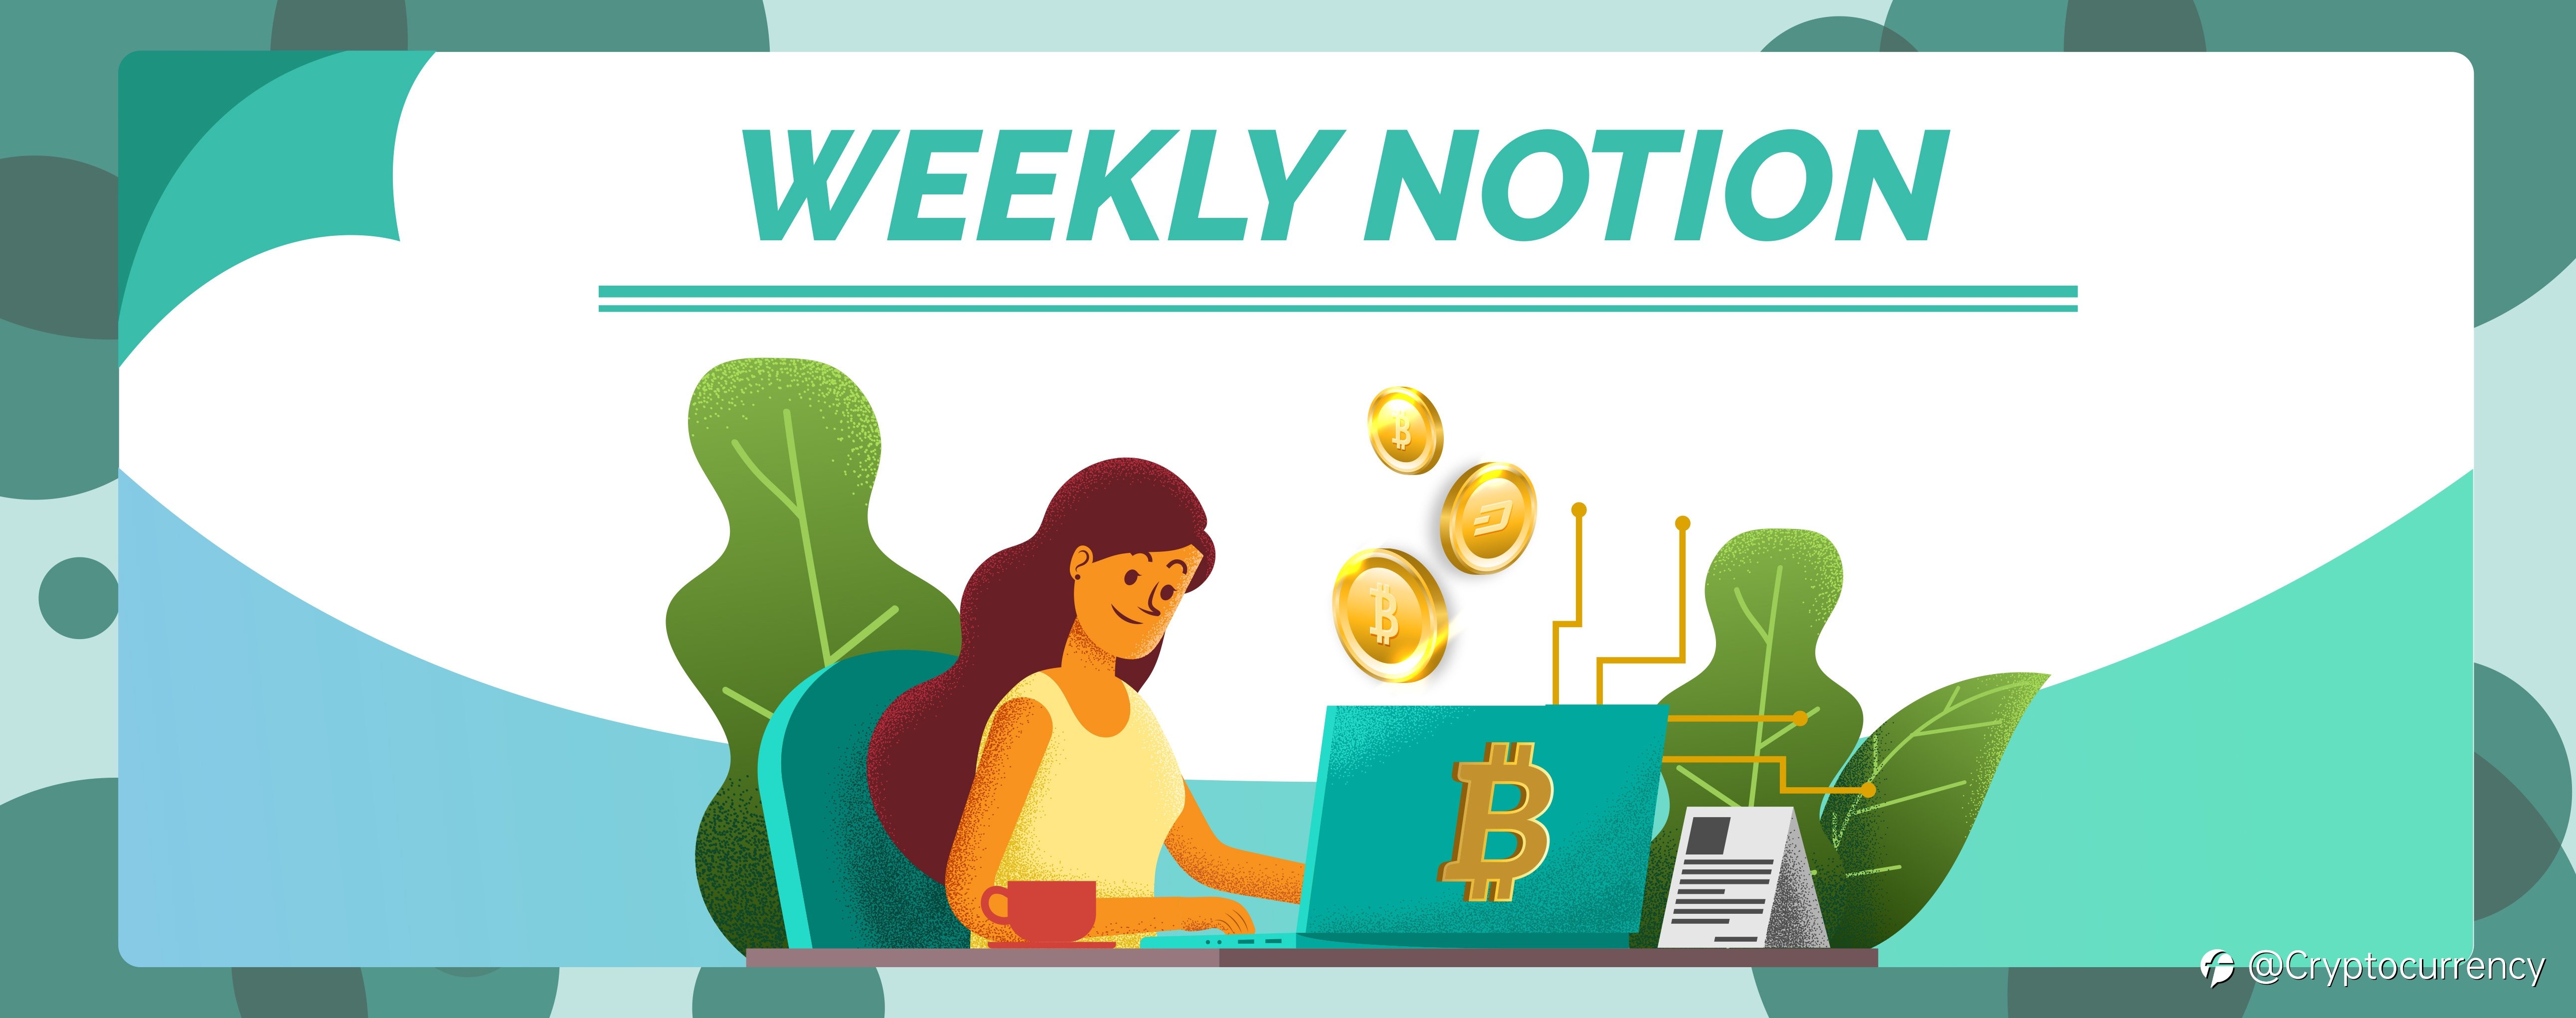 (WEEKLY NOTION): BTC/USD, ETH/USD, LTC/USD: Bulls Continue to Fight To Mark Their Dominance